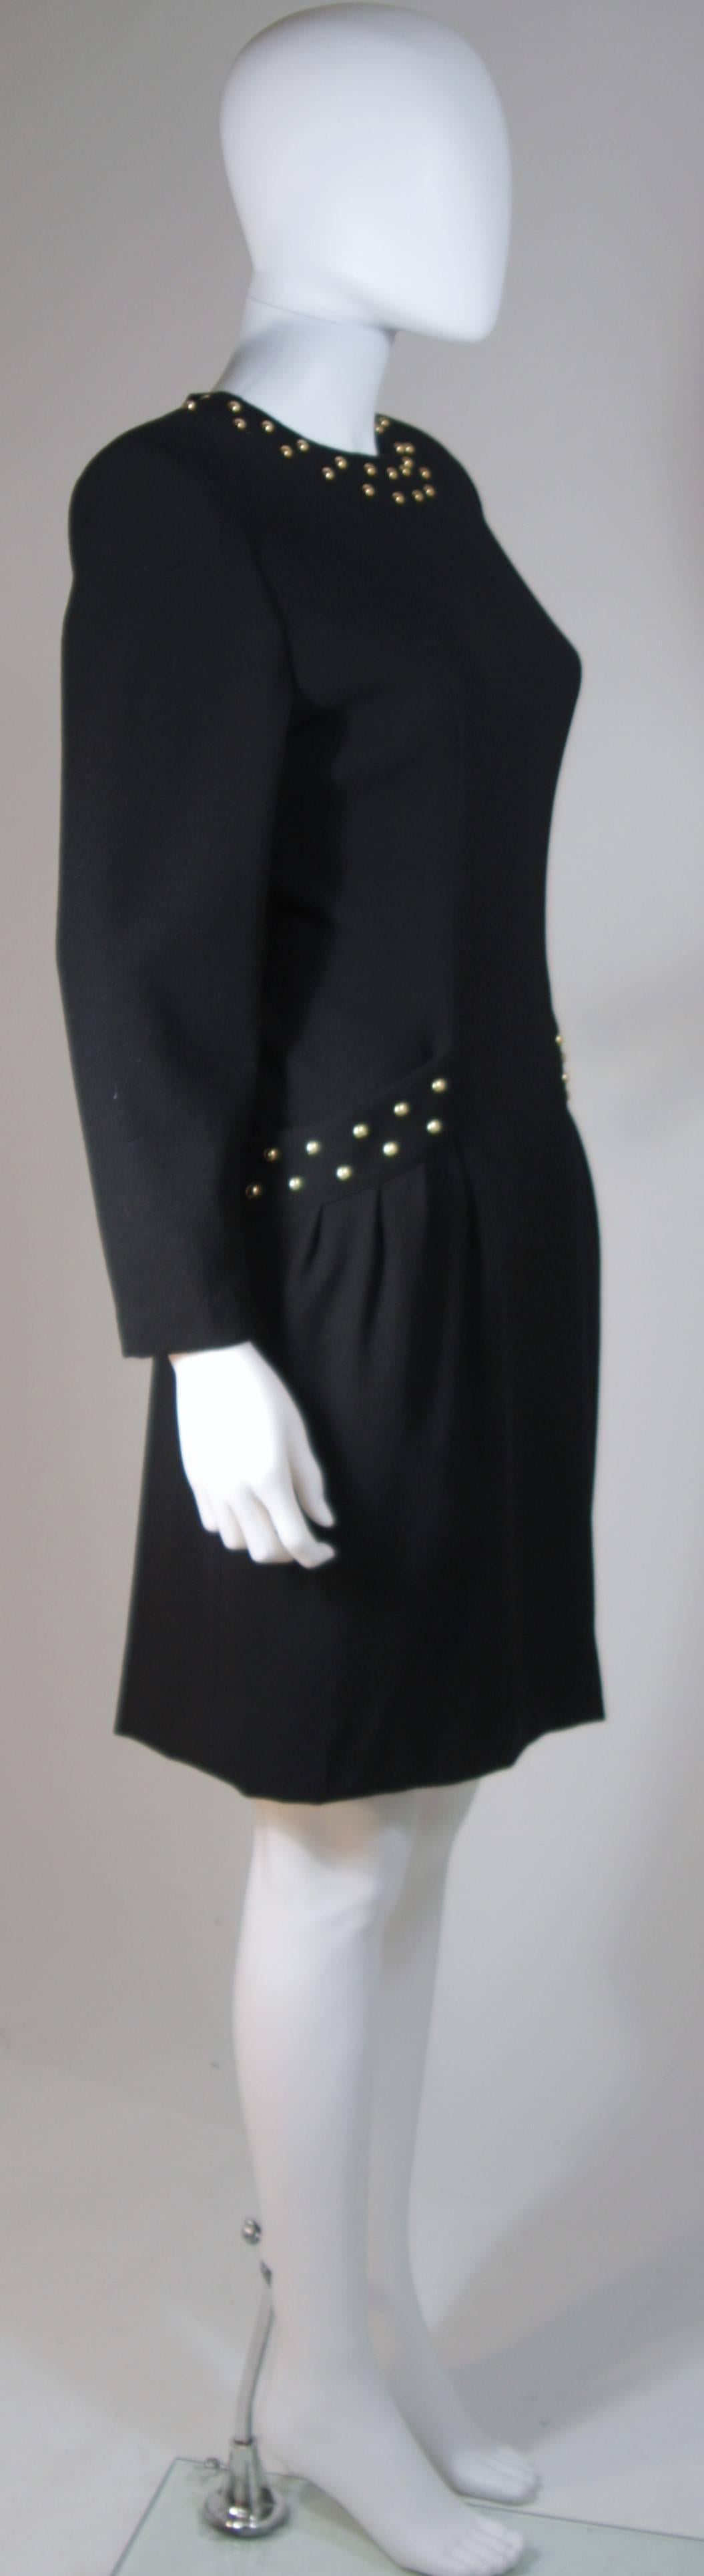 GUY LAROCHE Black Cocktail Dress with Stud Applique Size Large For Sale 1